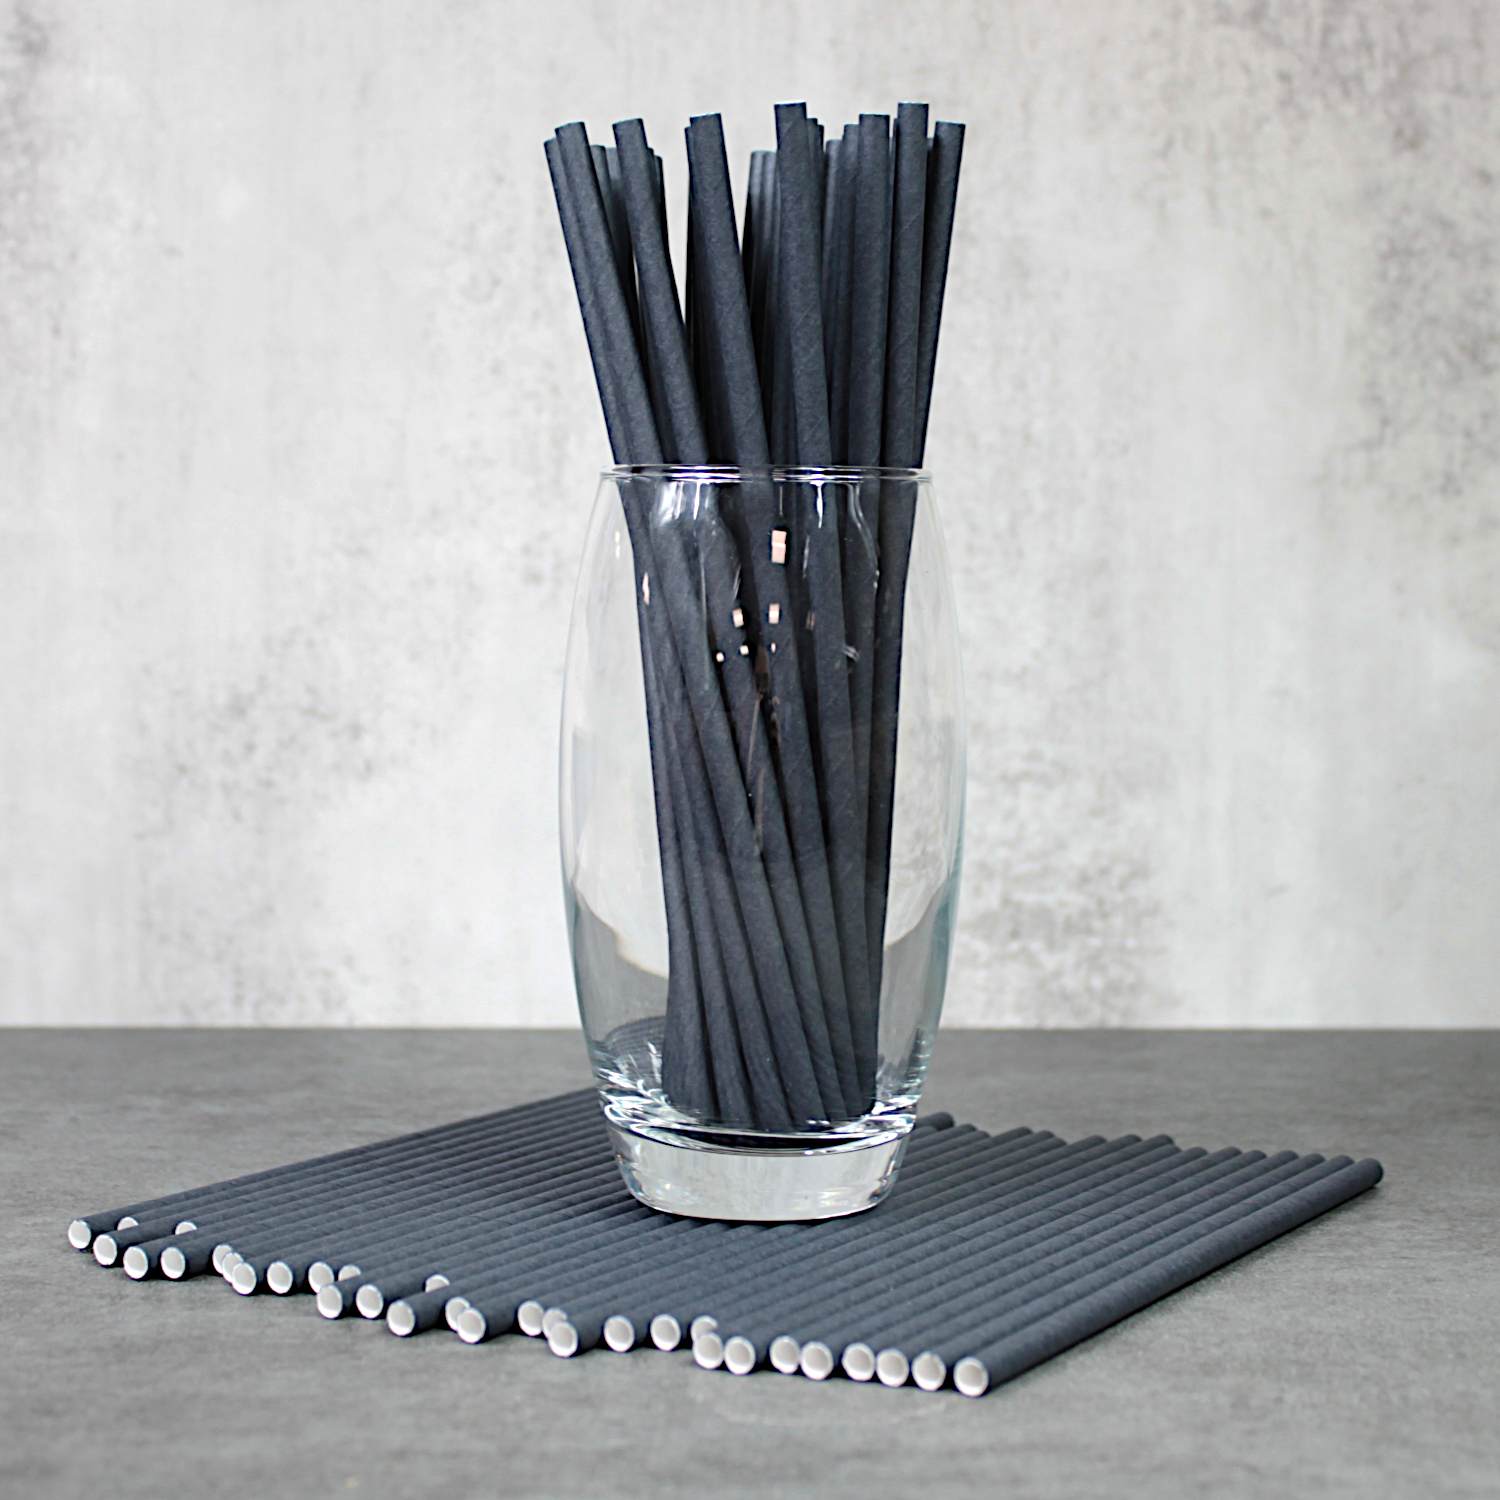 Introducing Midnight Black Paper Straws- A sustainable yet stylish choice